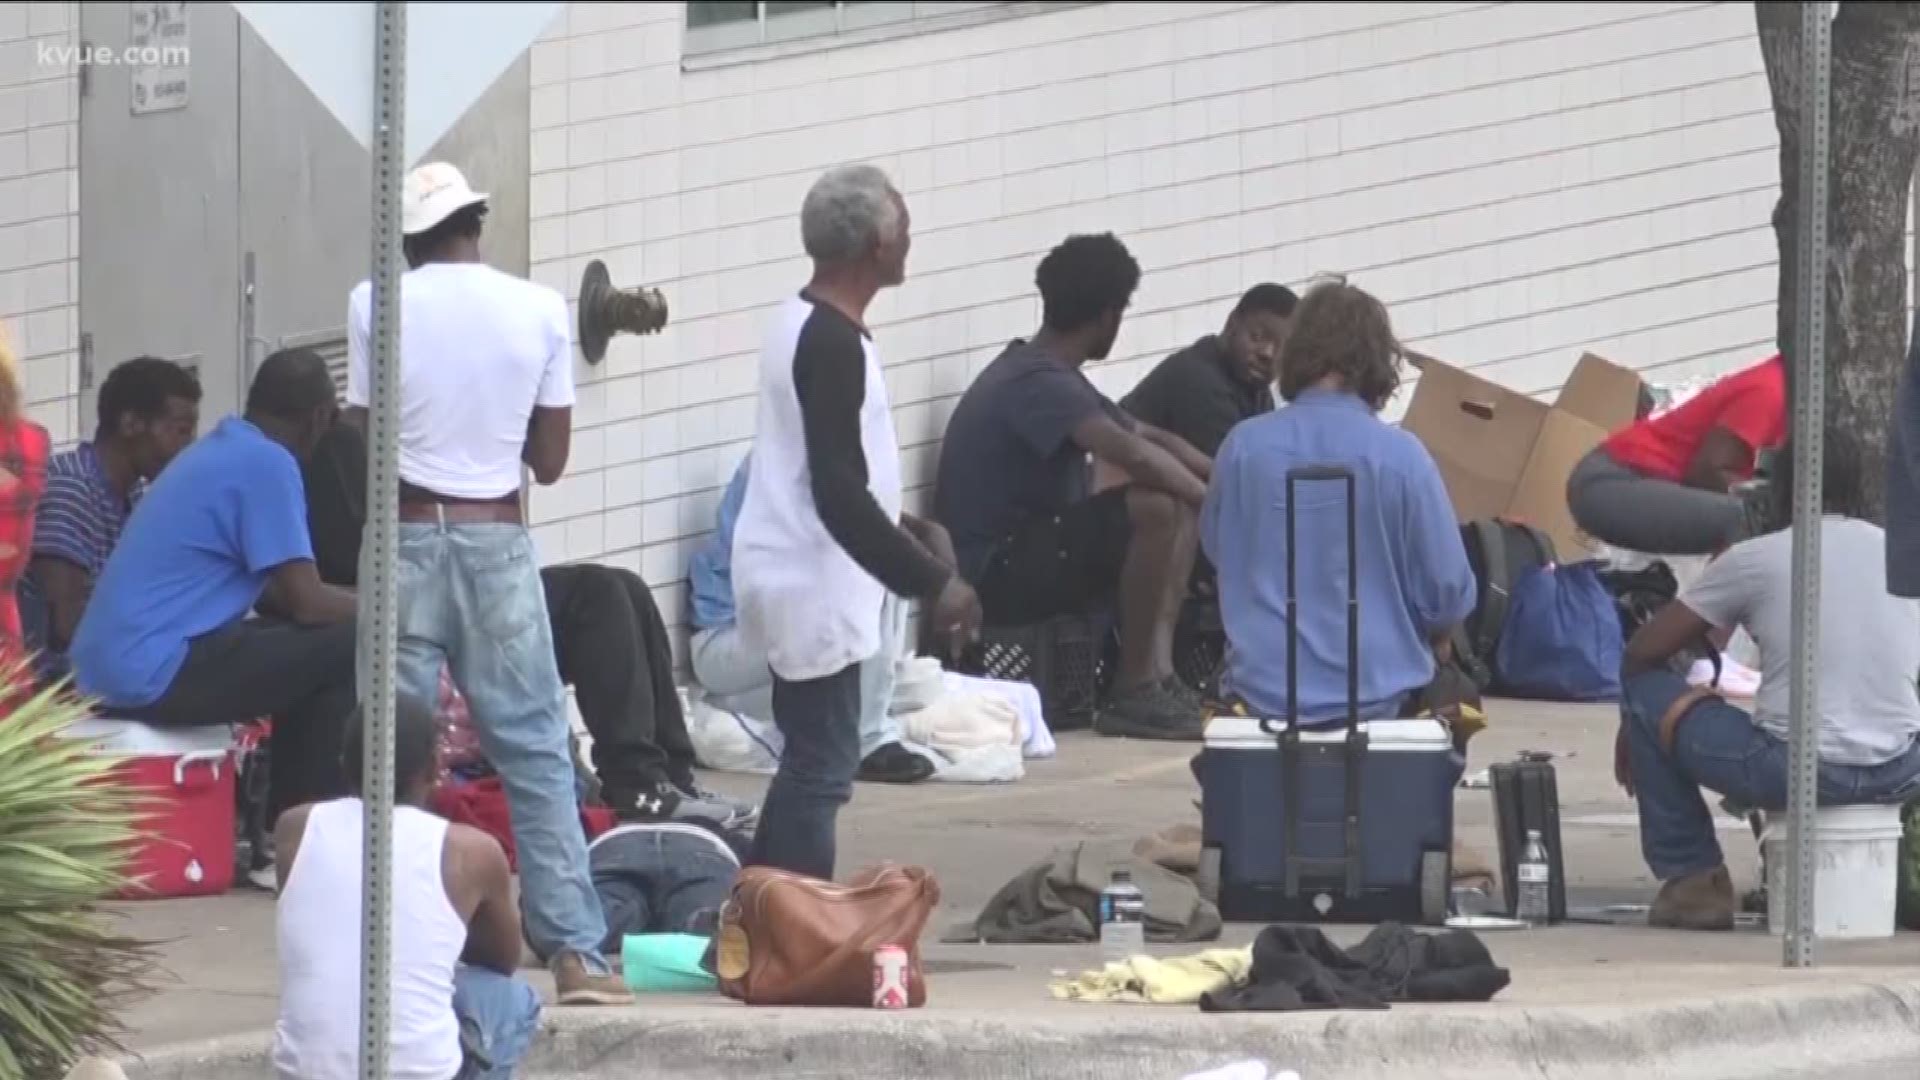 Austin city leaders have a big decision ahead of them this week, as they consider reinstating the ban on where homeless individuals can camp, sit and lie.